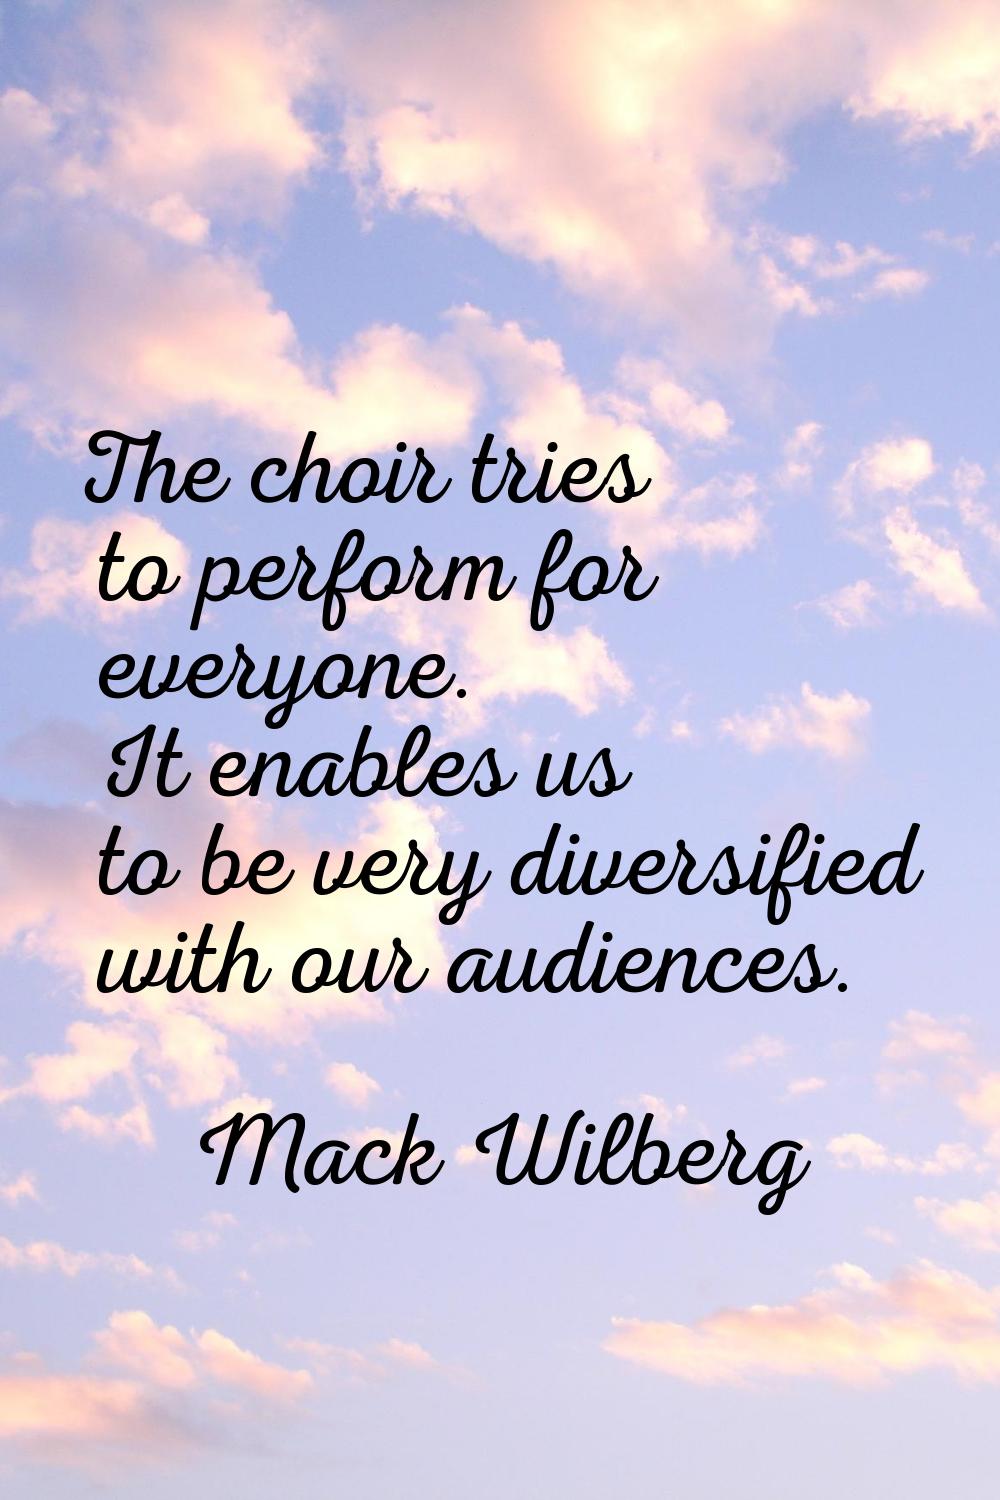 The choir tries to perform for everyone. It enables us to be very diversified with our audiences.